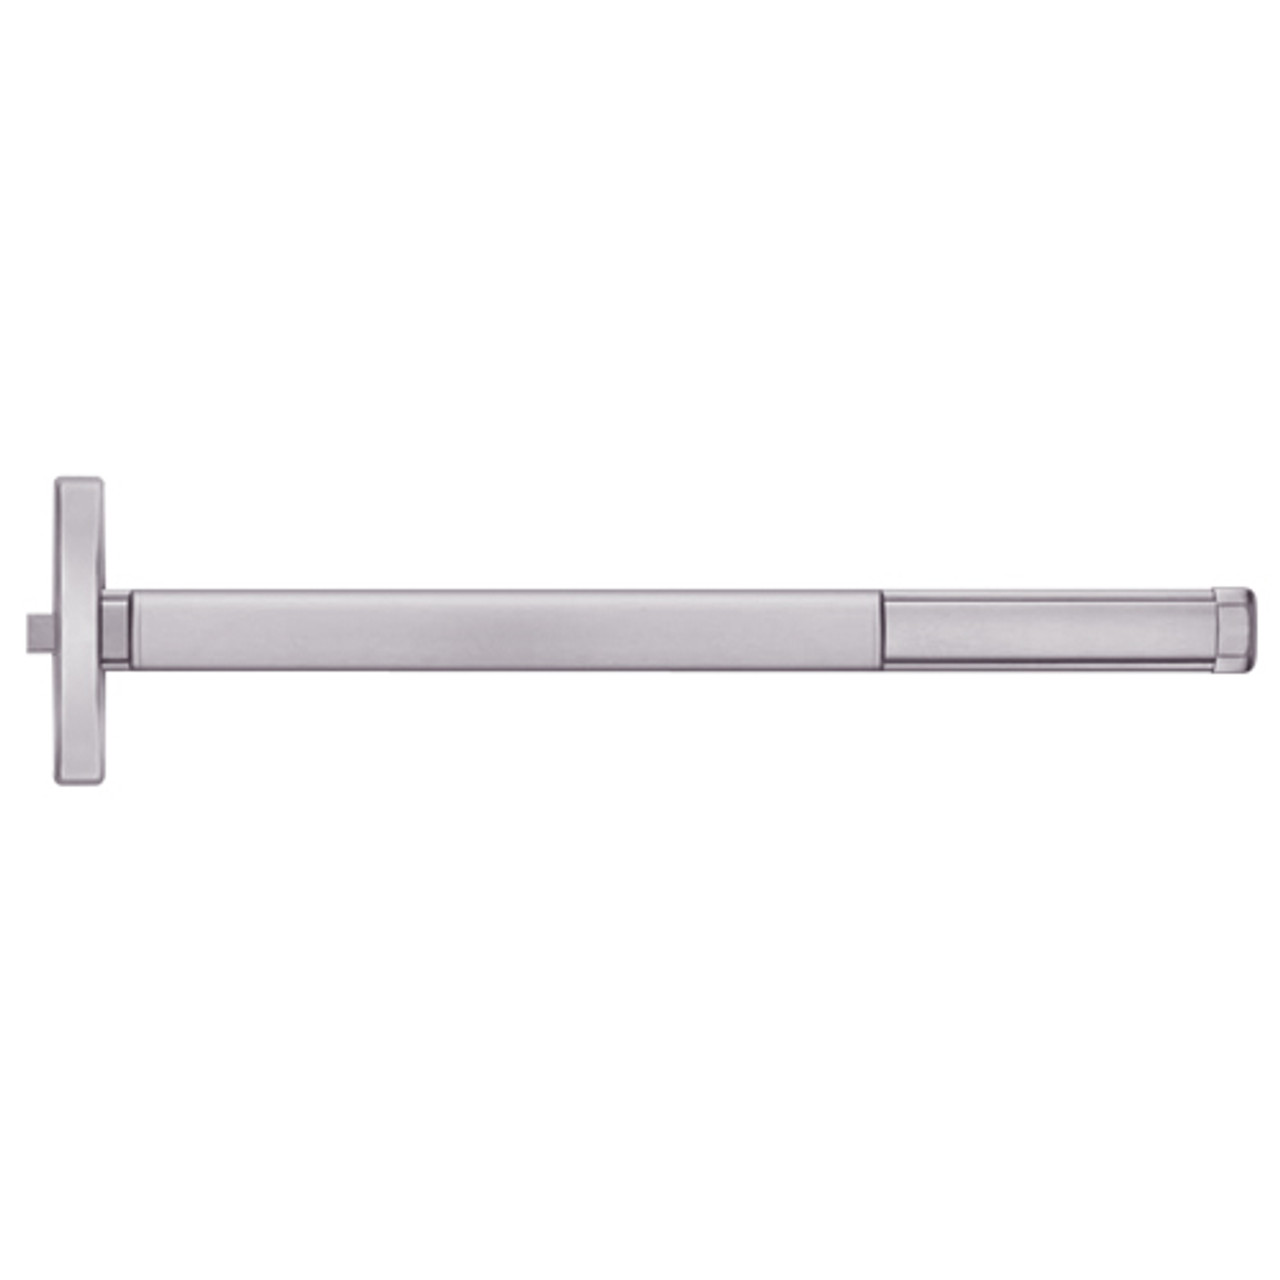 TSFL2403-630-36 PHI 2400 Series Fire Rated Apex Rim Exit Device with Touchbar Monitoring Switch Prepped for Key Retracts Latchbolt in Satin Stainless Steel Finish